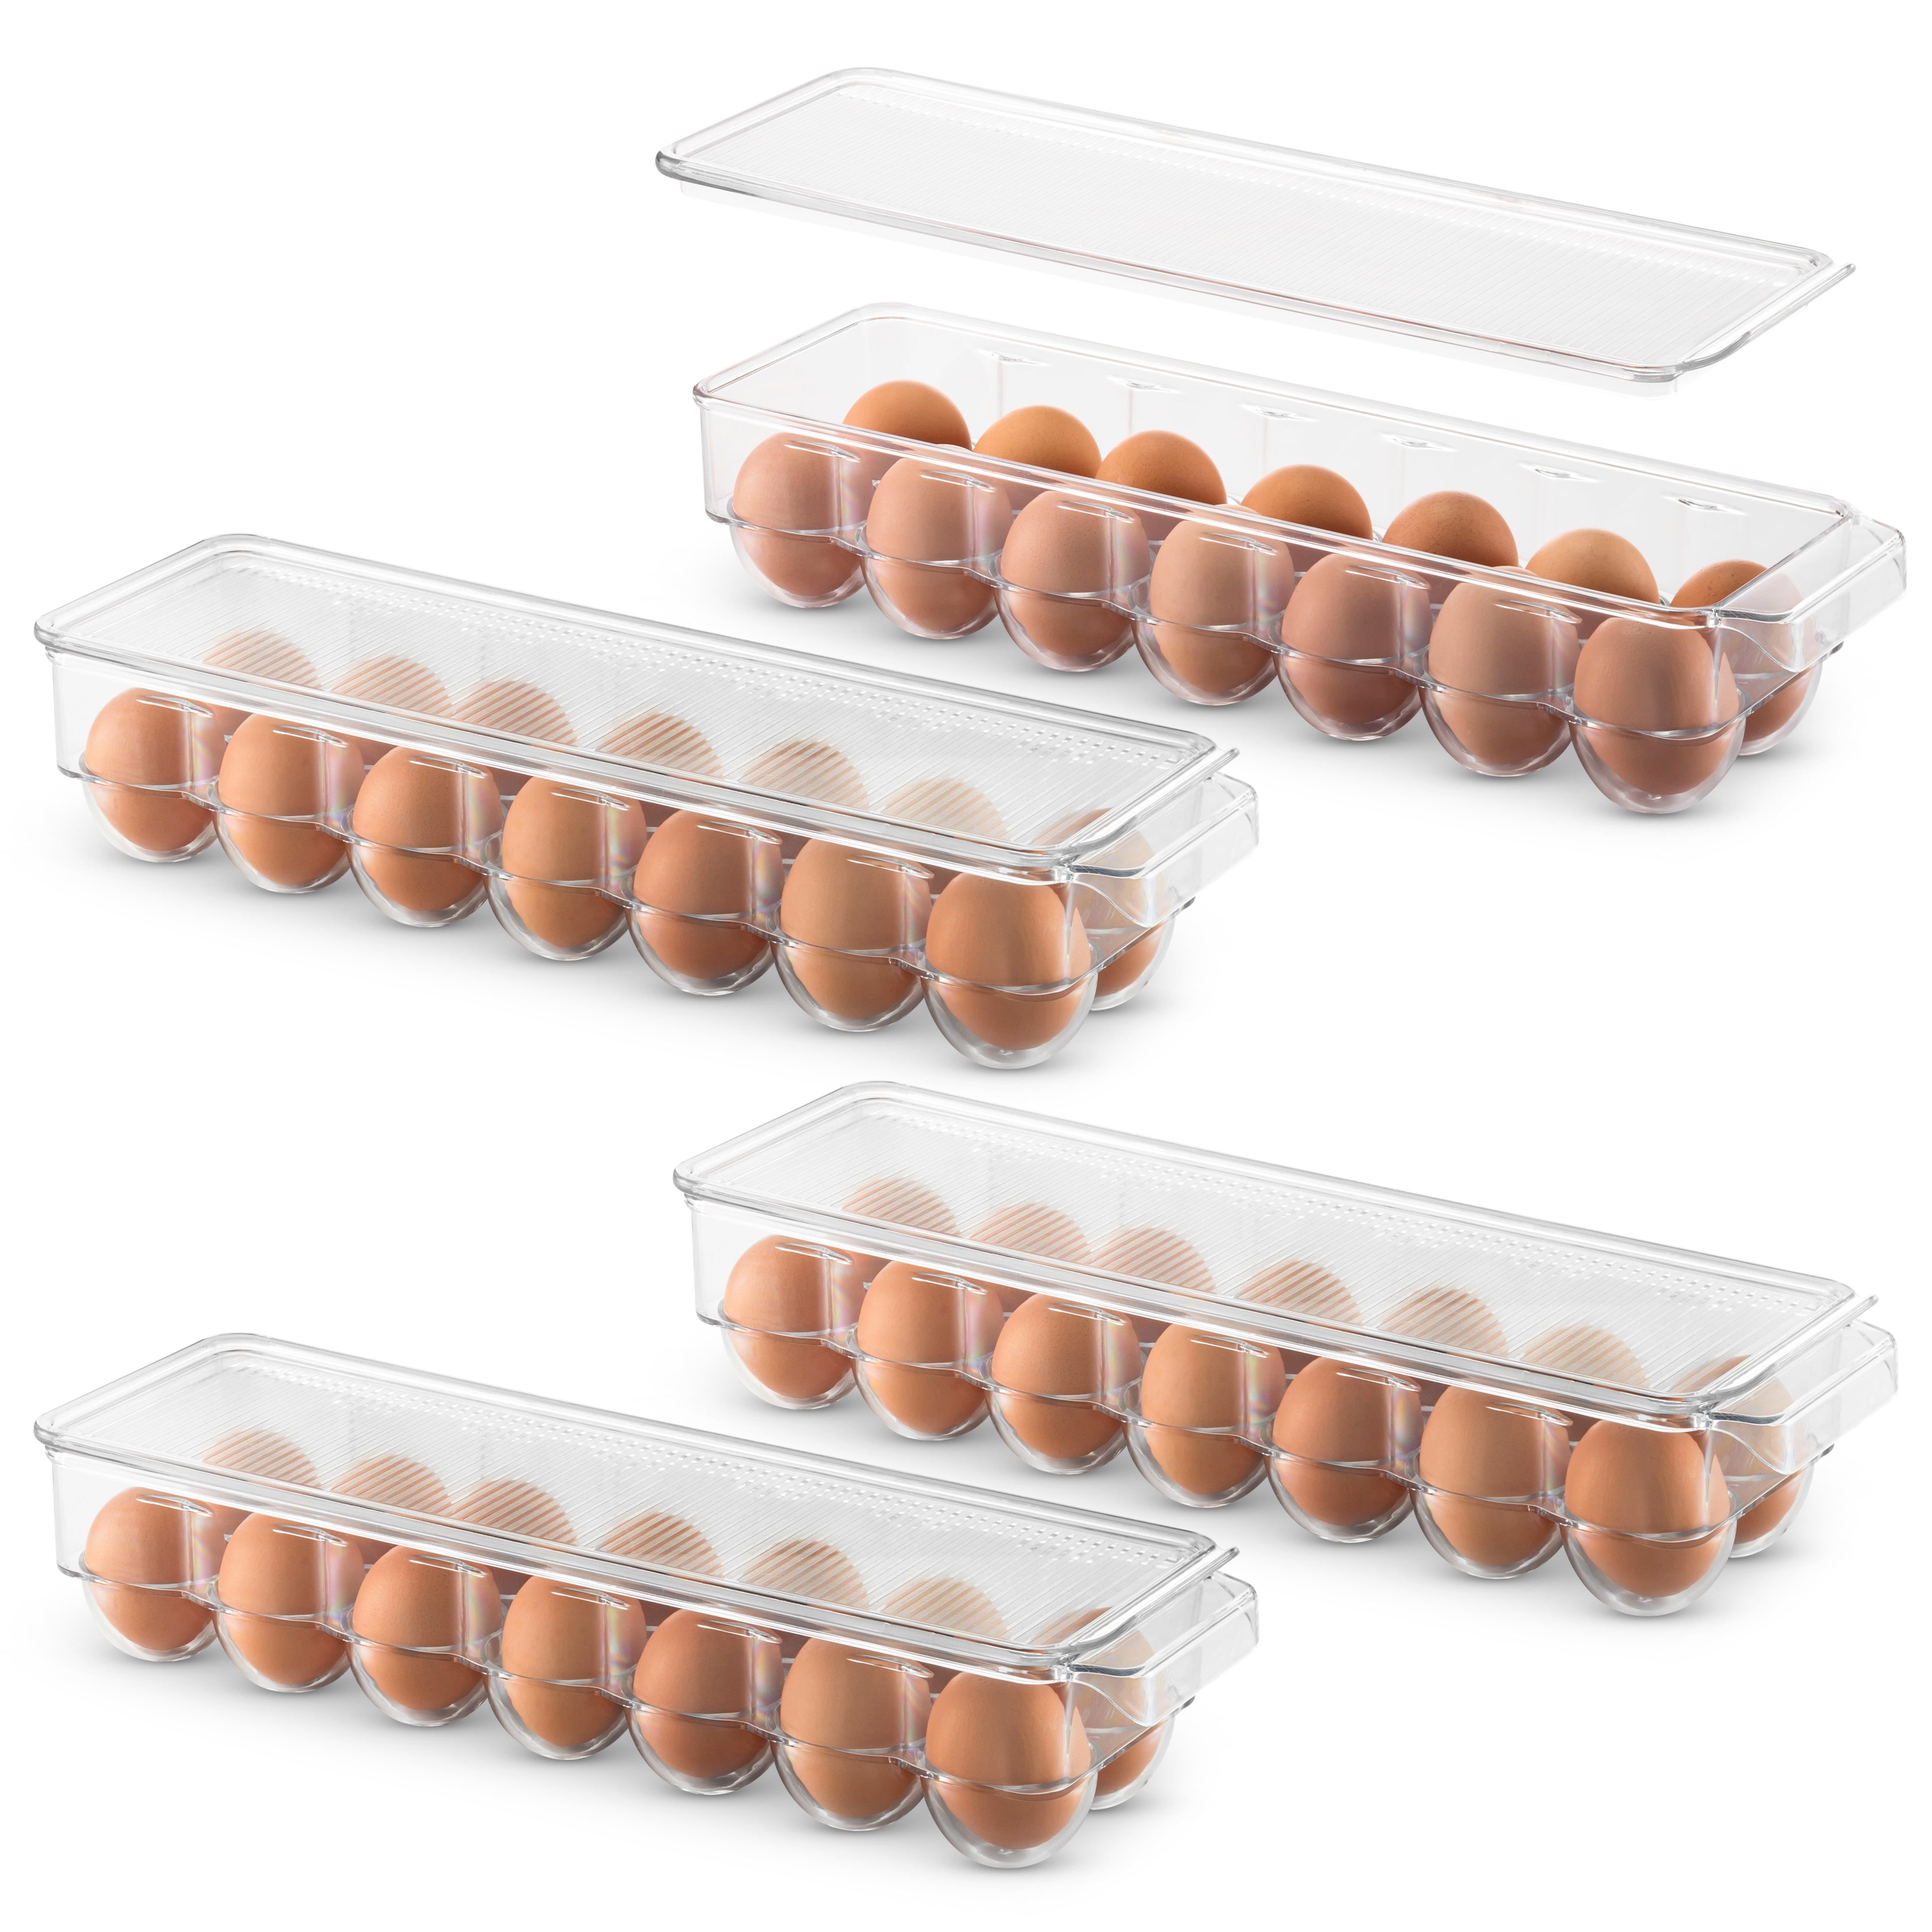 Egg Holder Boxes Tray Storage Box Eggs Refrigerator Container Plastic Case F7T6 